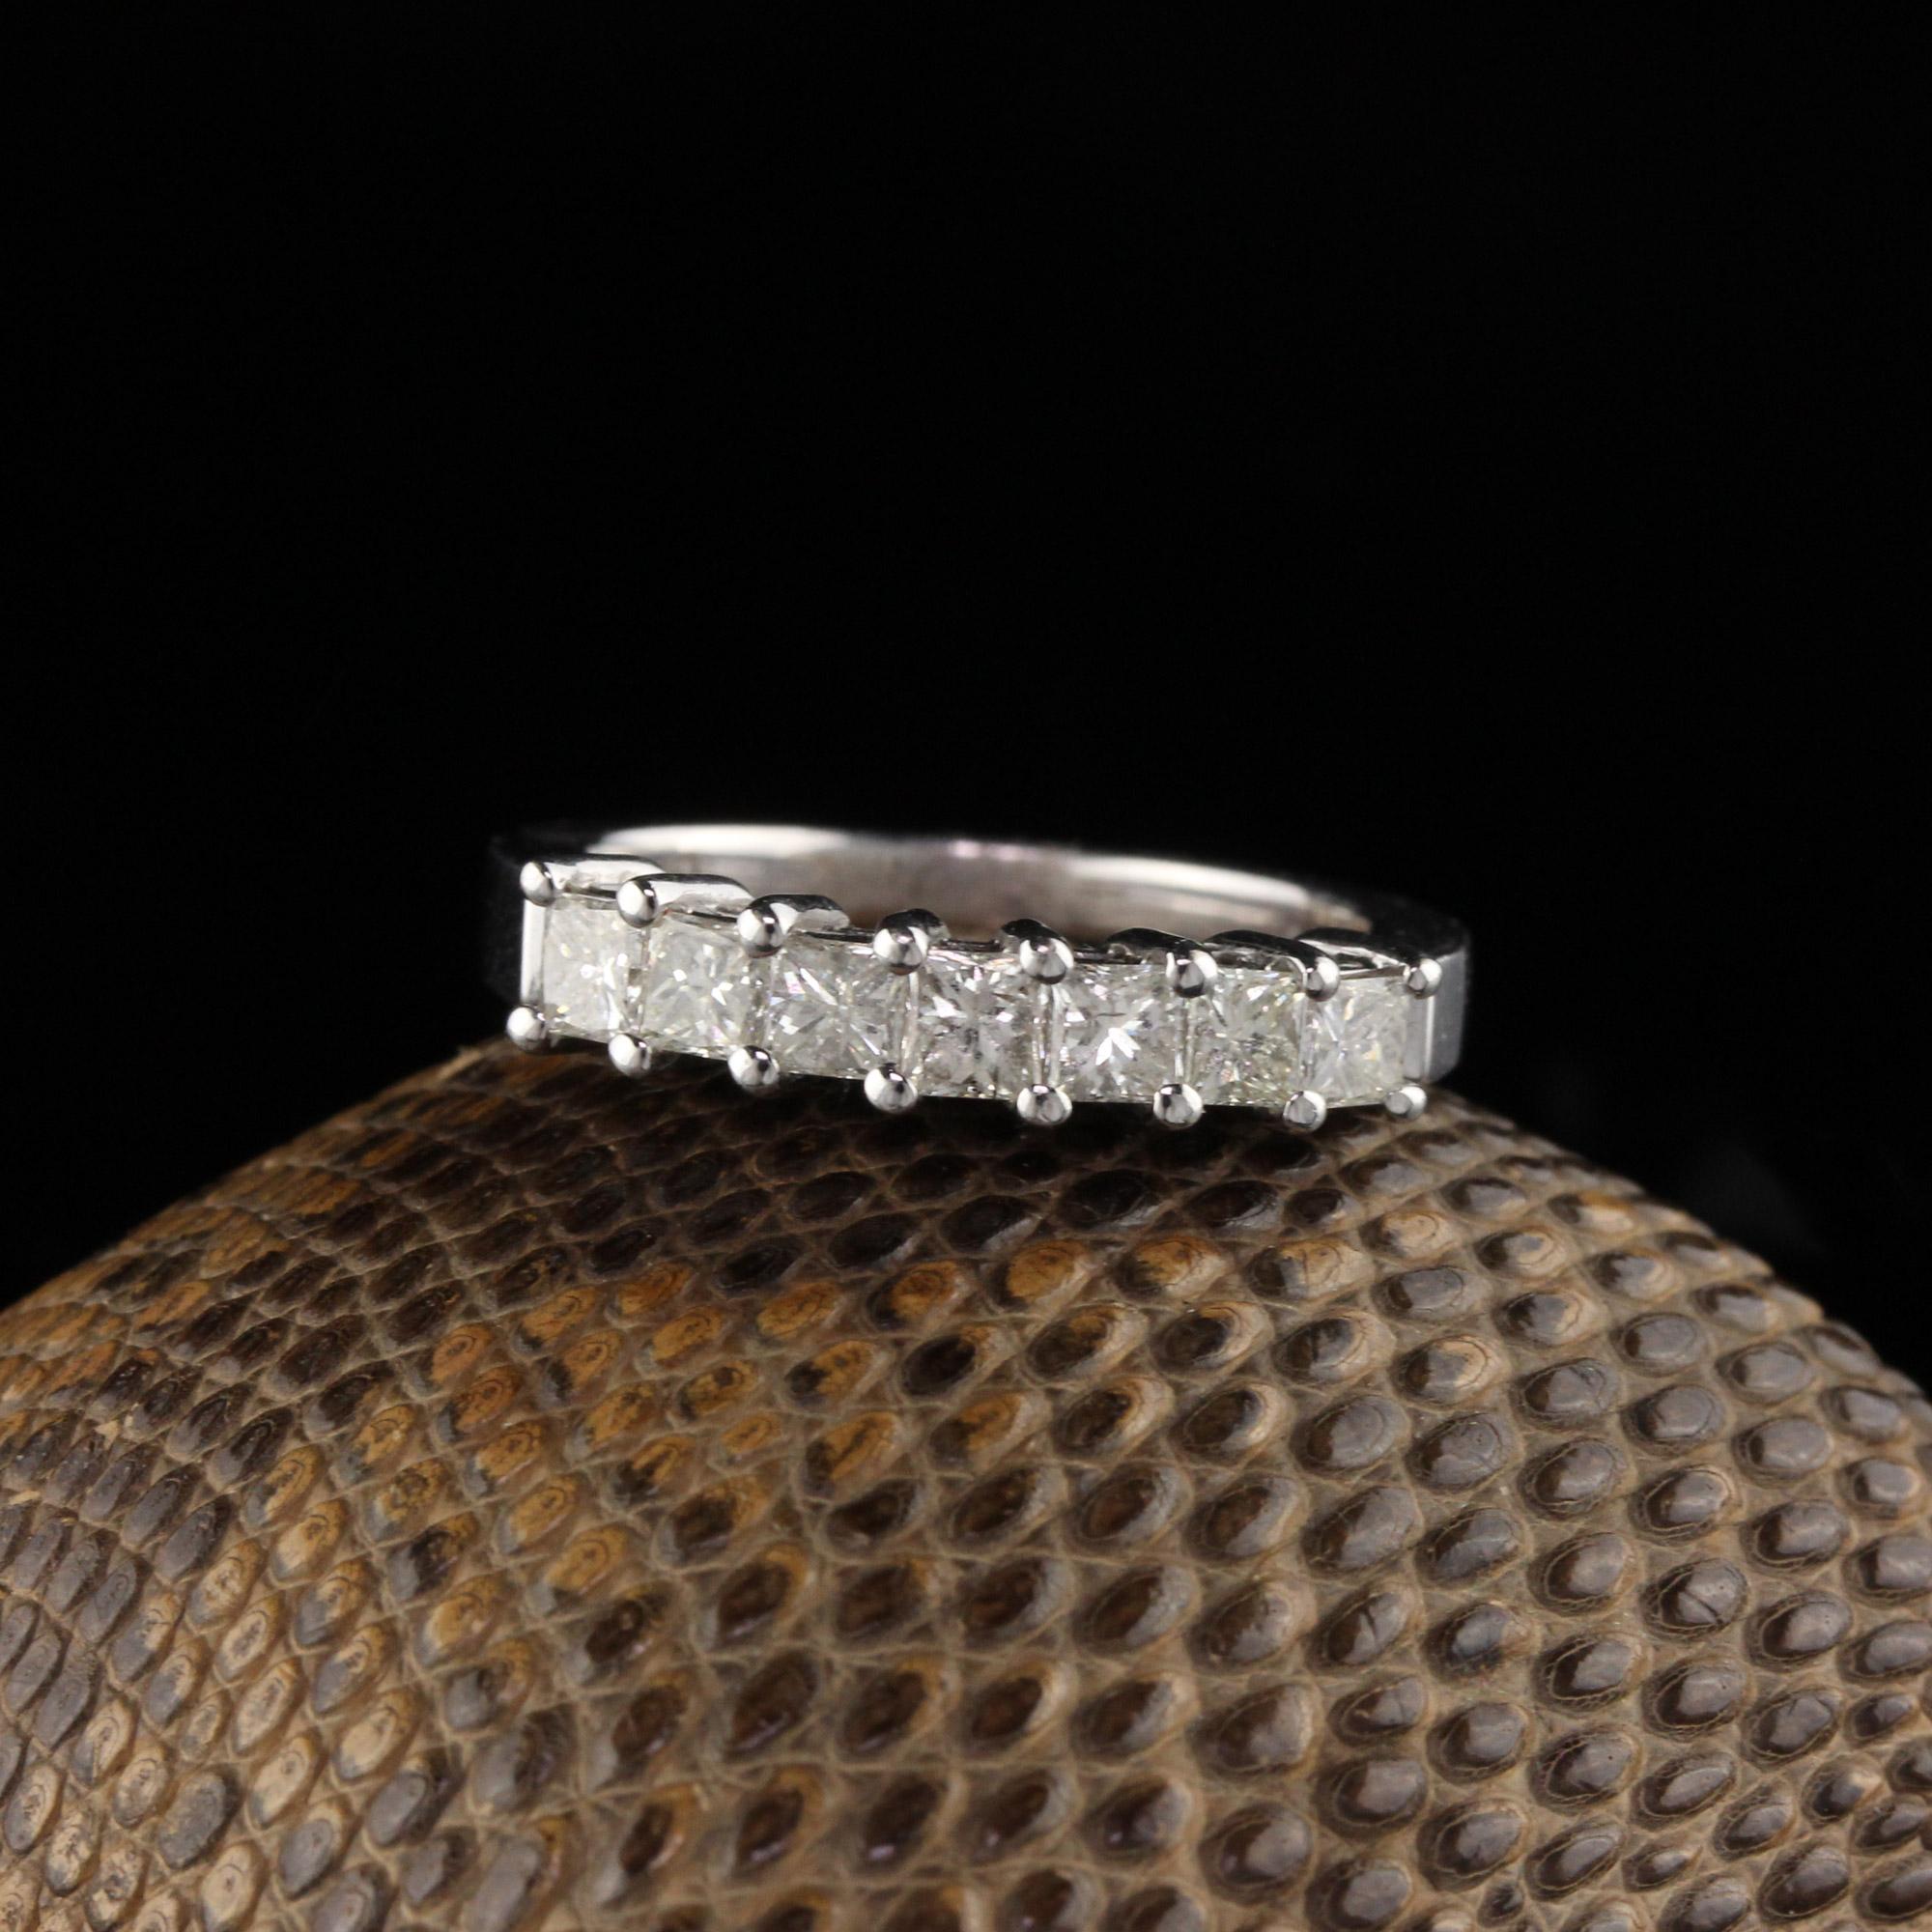 Elegant seven diamond band.

Metal: 14K White Gold

Weight: 4.0 Grams

Total Diamond Weight: Approximately 1.20 ct.

Diamond Color: H

Diamond Clarity: SI2

Ring Size: 6.25 (sizable)

Measurements: 4.30 x 4.87 mm
